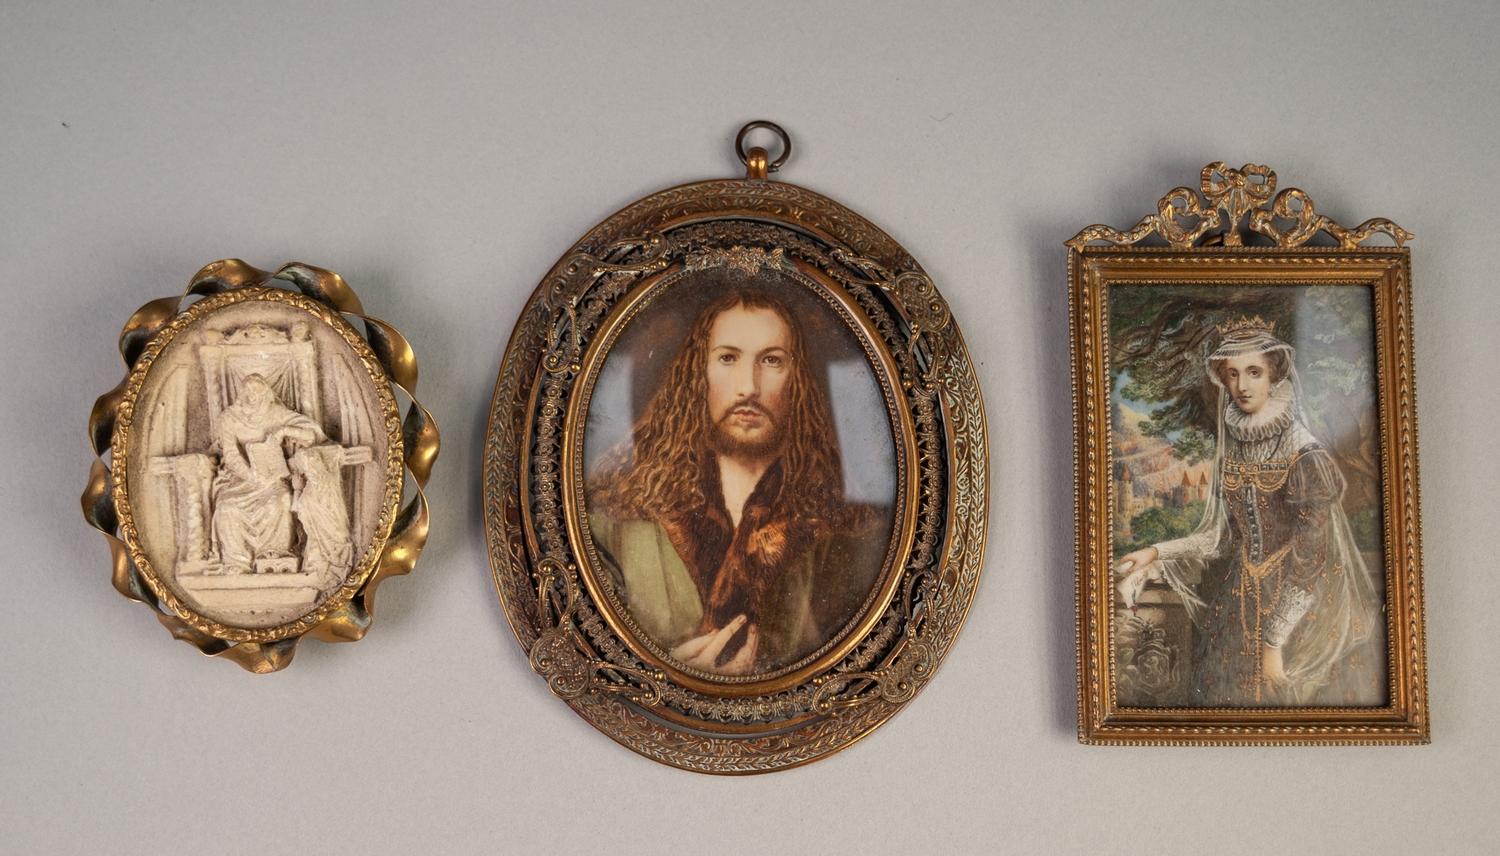 A LATE 19TH CENTURY FRENCH PASTICHE PORTRAIT MINIATURE ON IVORY OF A 16th/17th CENTURY QUEEN OR